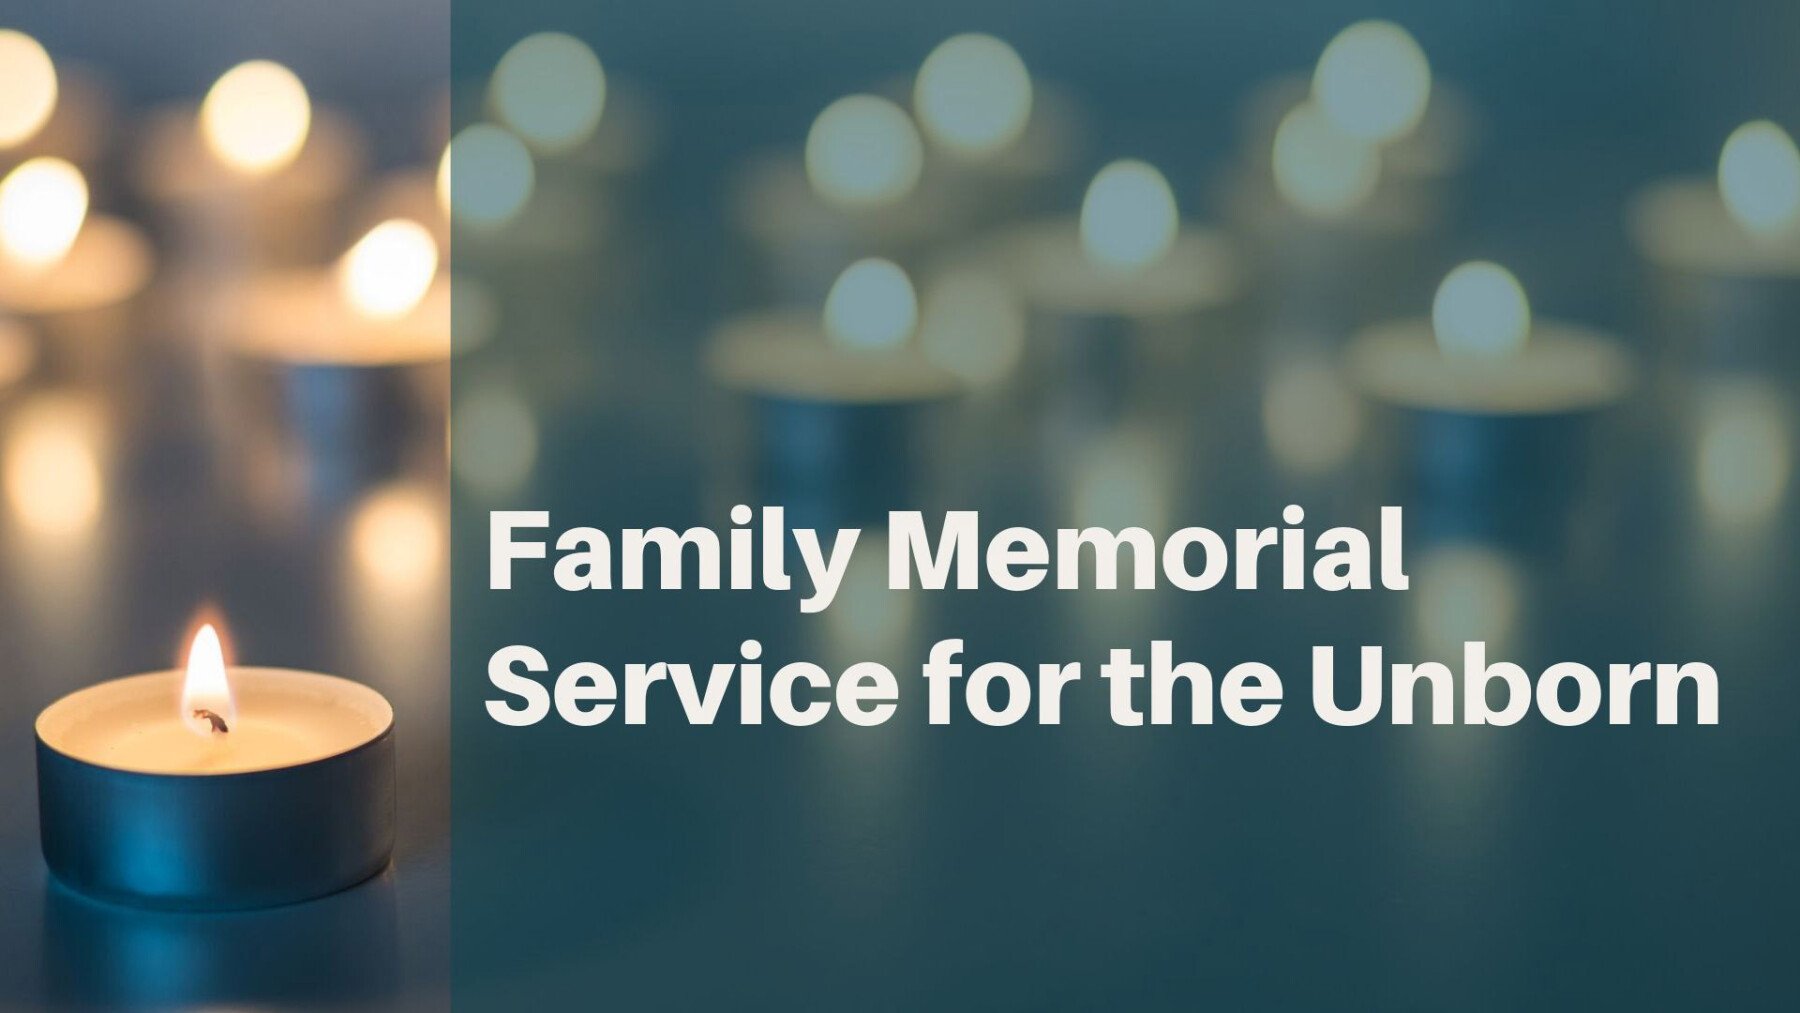 Family Memorial Service for the Unborn